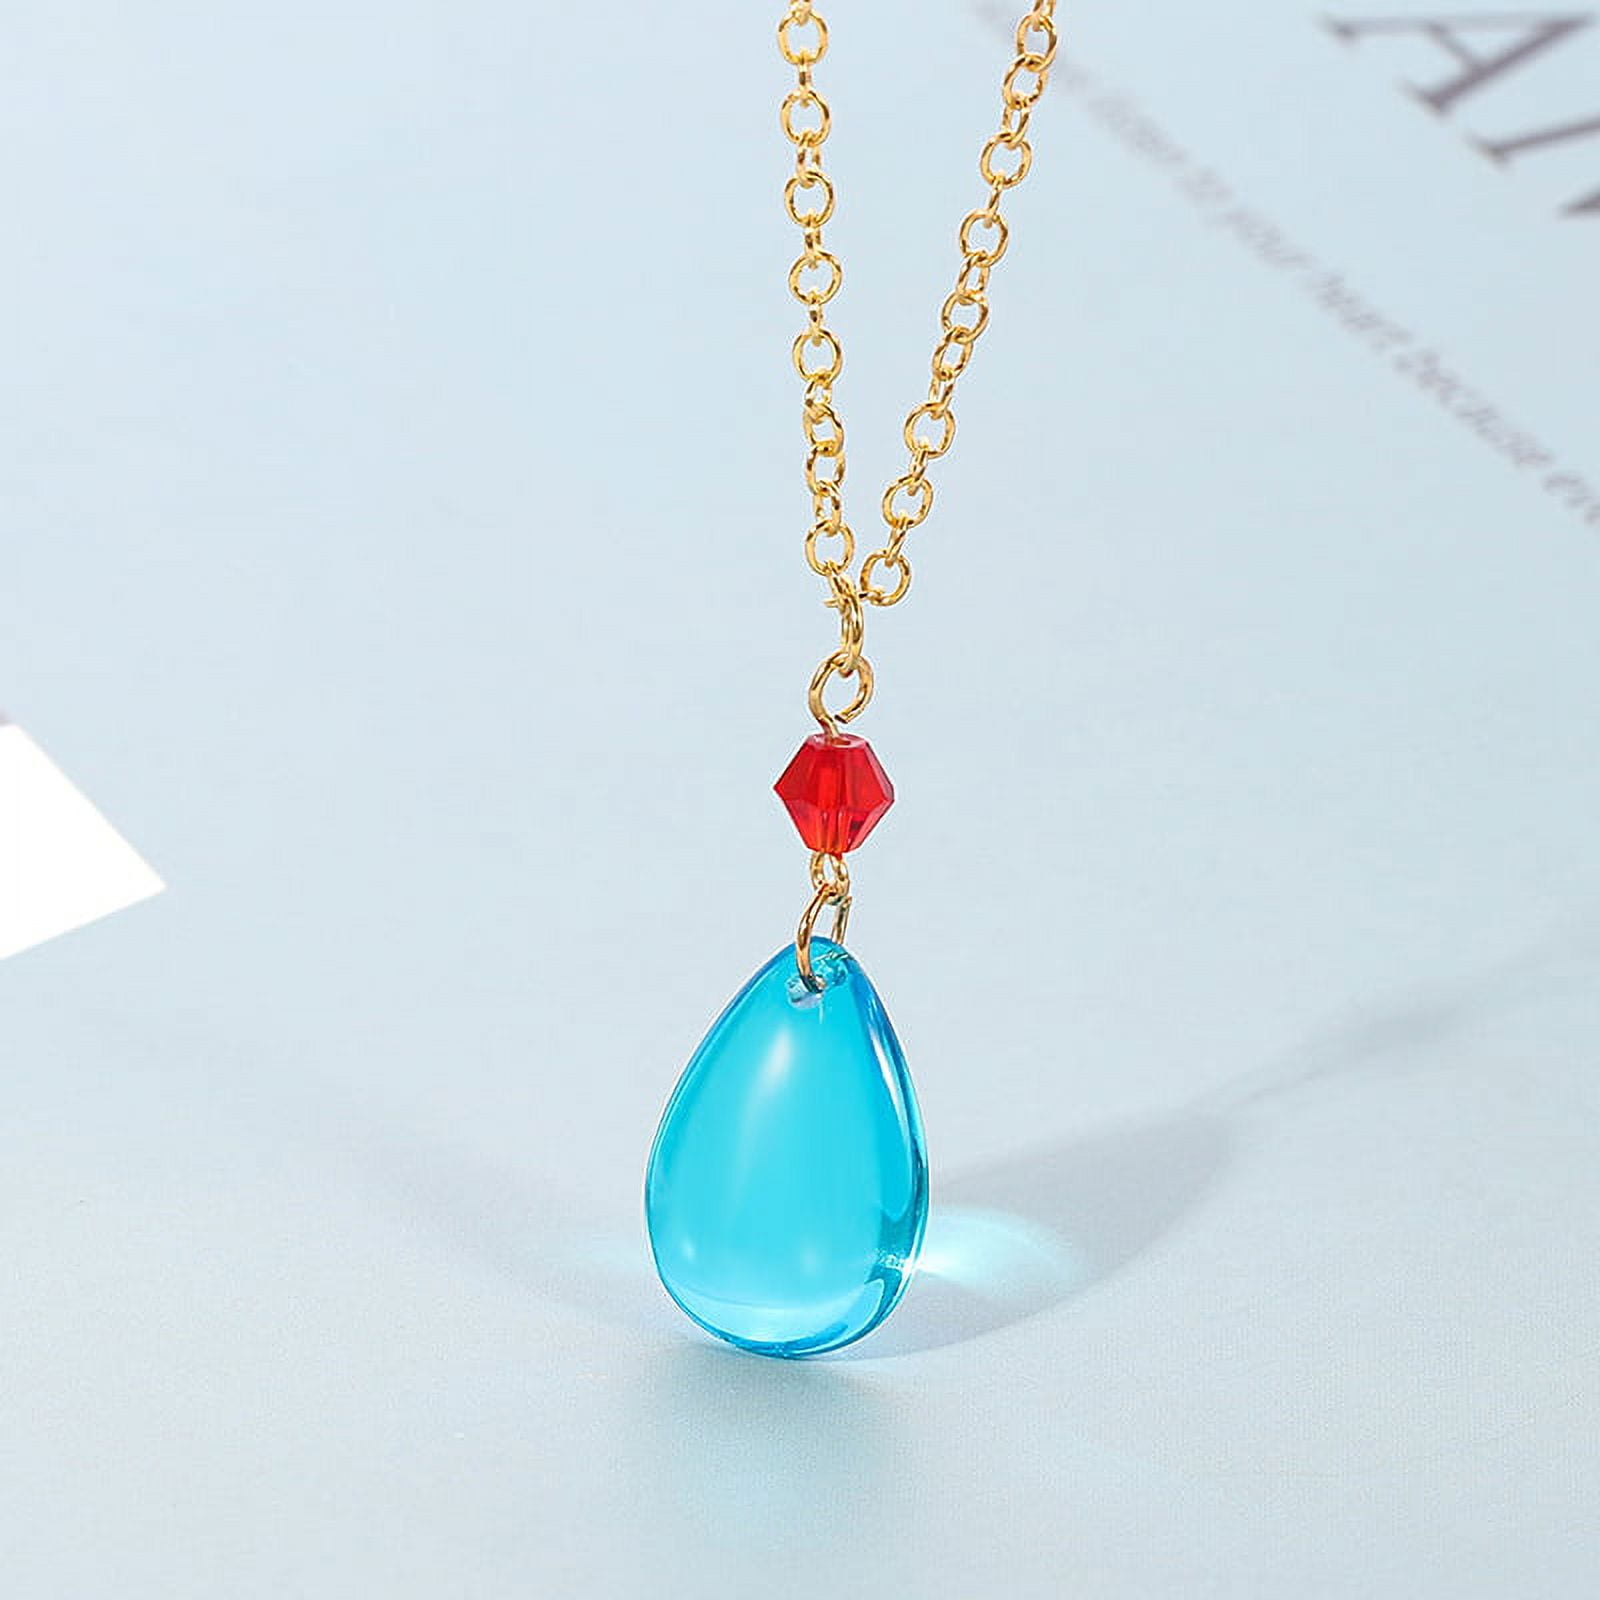 Anime Howl's Moving Castle Necklace Unisex Howl Cosplay Costume Blue  Crystal Pendant Choker - Welcome to Shopen.pk - Your Online Anime / Manga /  Comic Merchandise Store & Fashion Shop